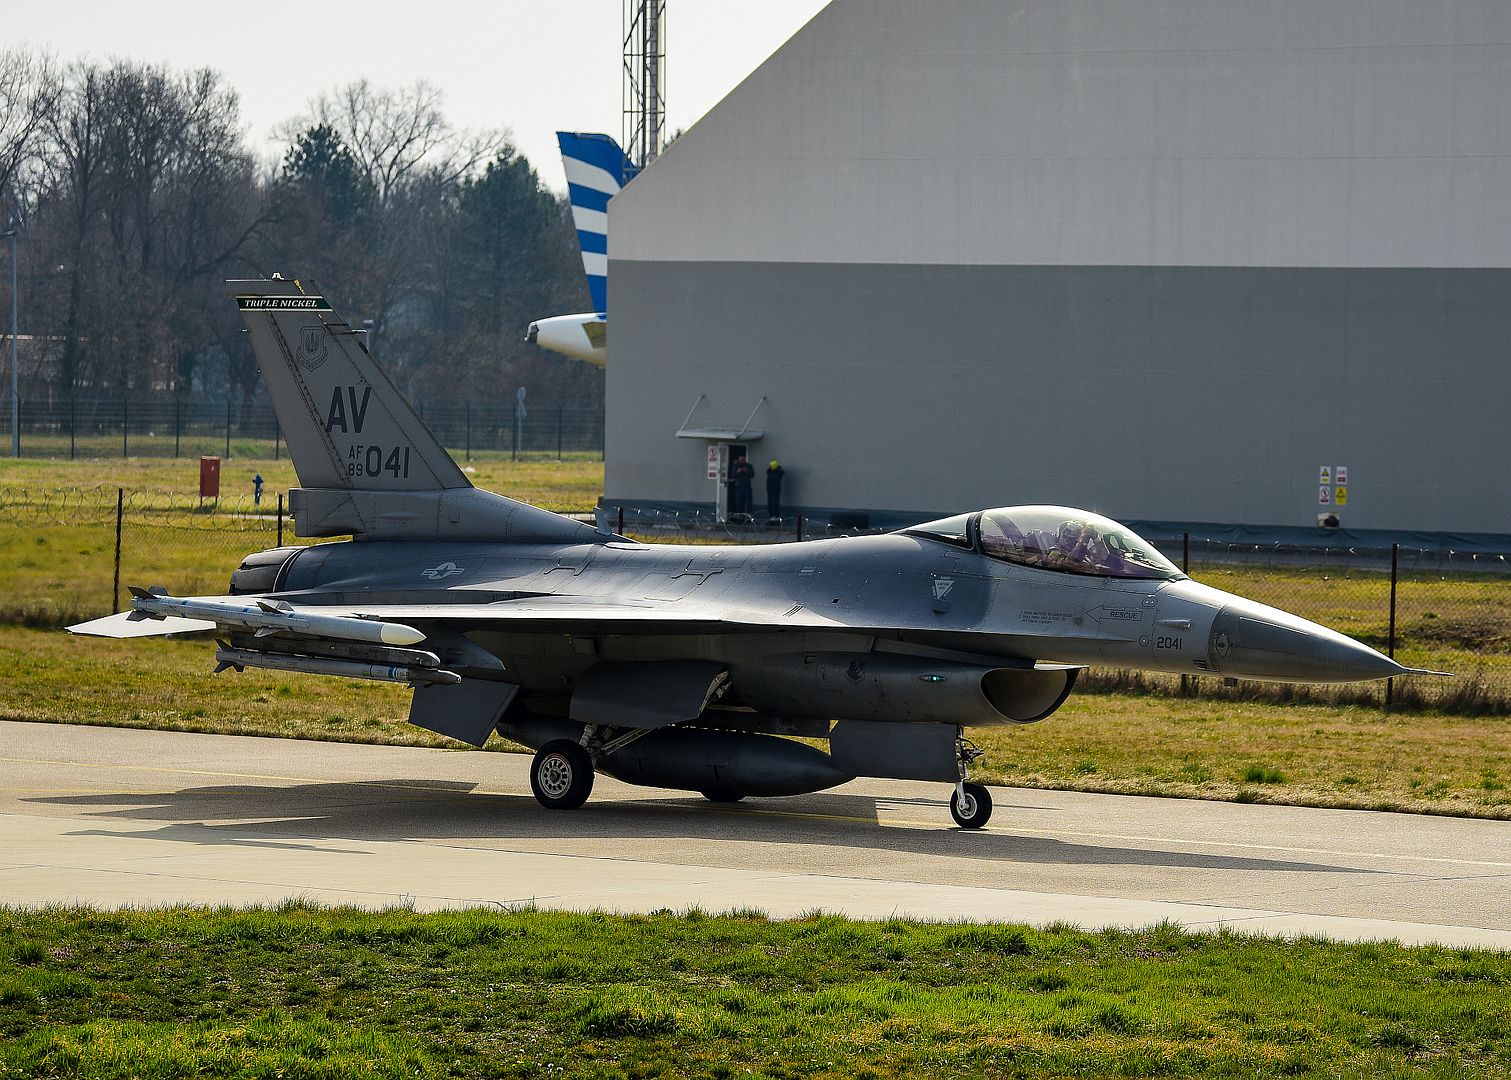 16C Fighting Falcon Pilot Assigned To The 555th Fighter Squadron From The 31st Fighter Wing Aviano Air Base